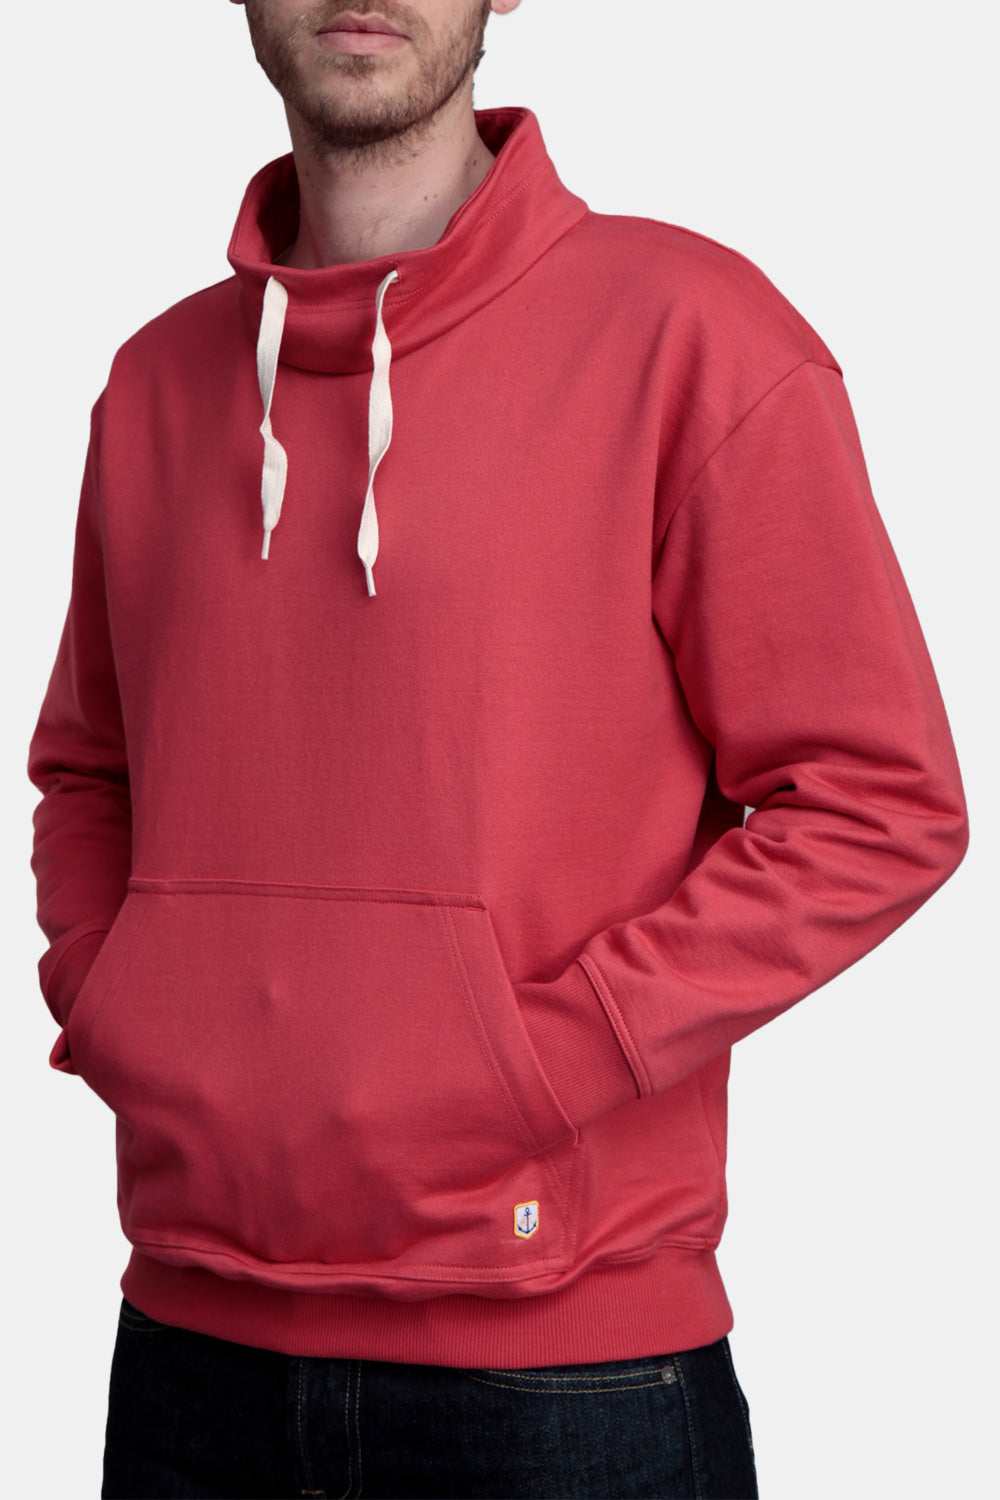 Armor Lux Organic Cotton Sweatshirt Stand-Up Collar (Cranberry Red)